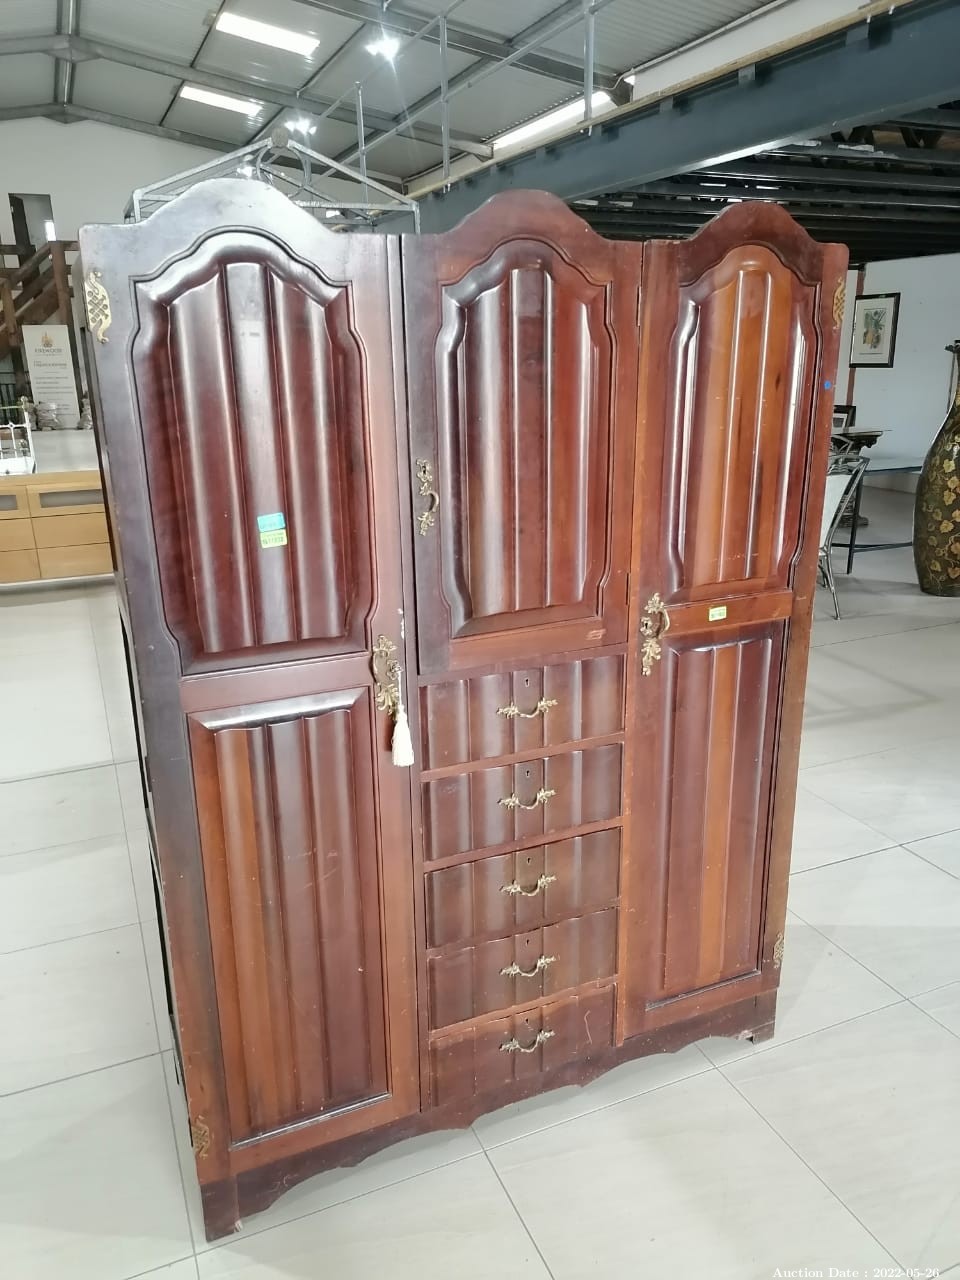 1918 - 1 x Solid Wood Wardrobe with 5 Drawers